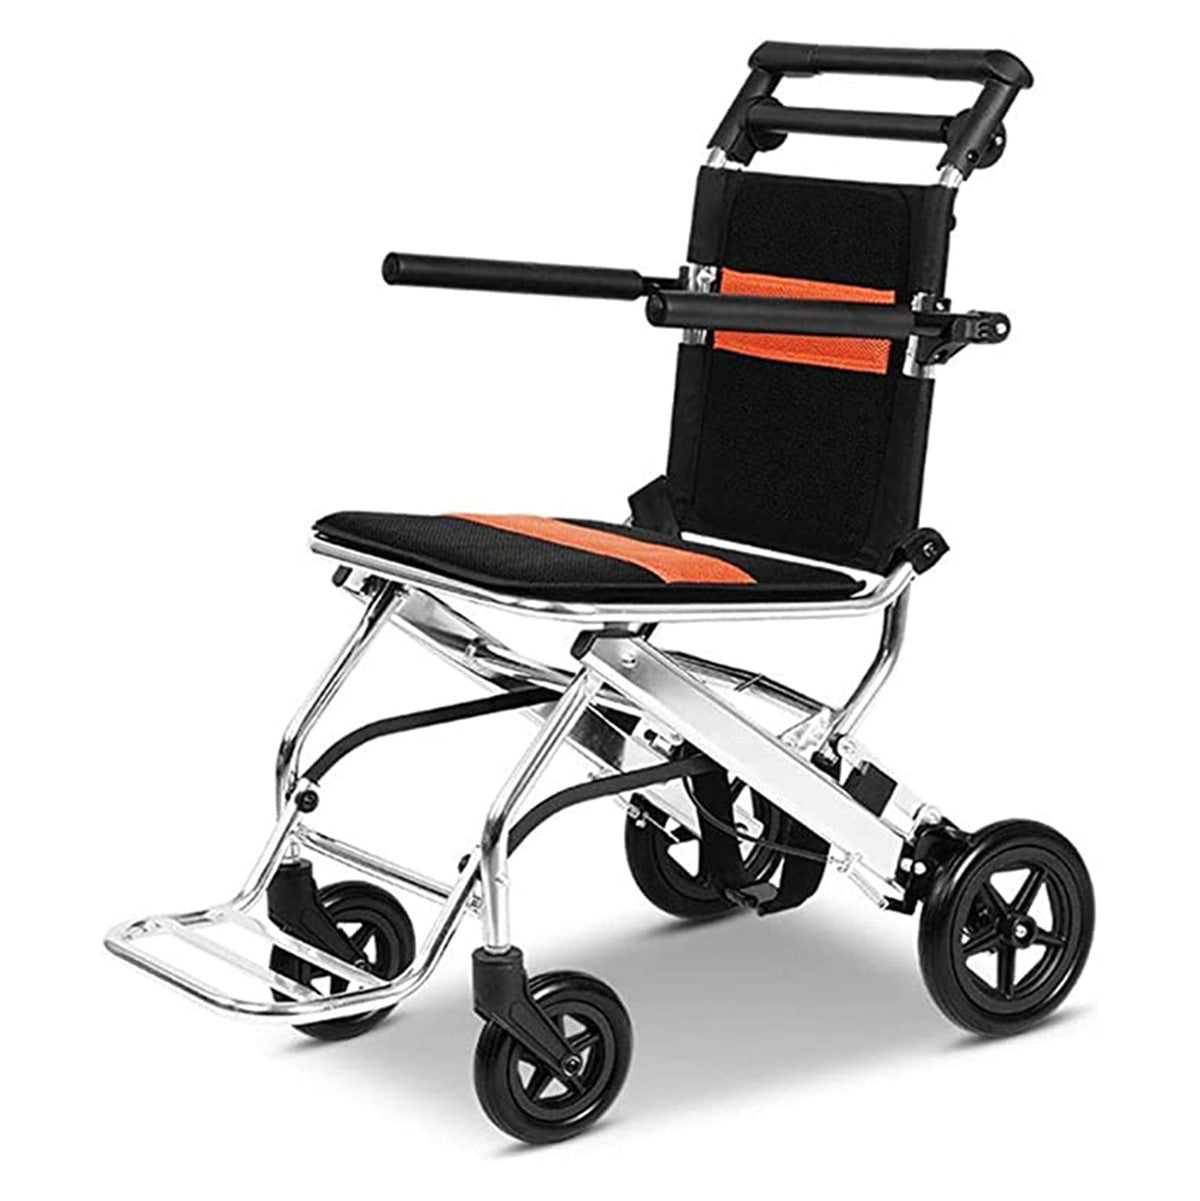 Foldable and Portable Travel Lightweight Push Chair